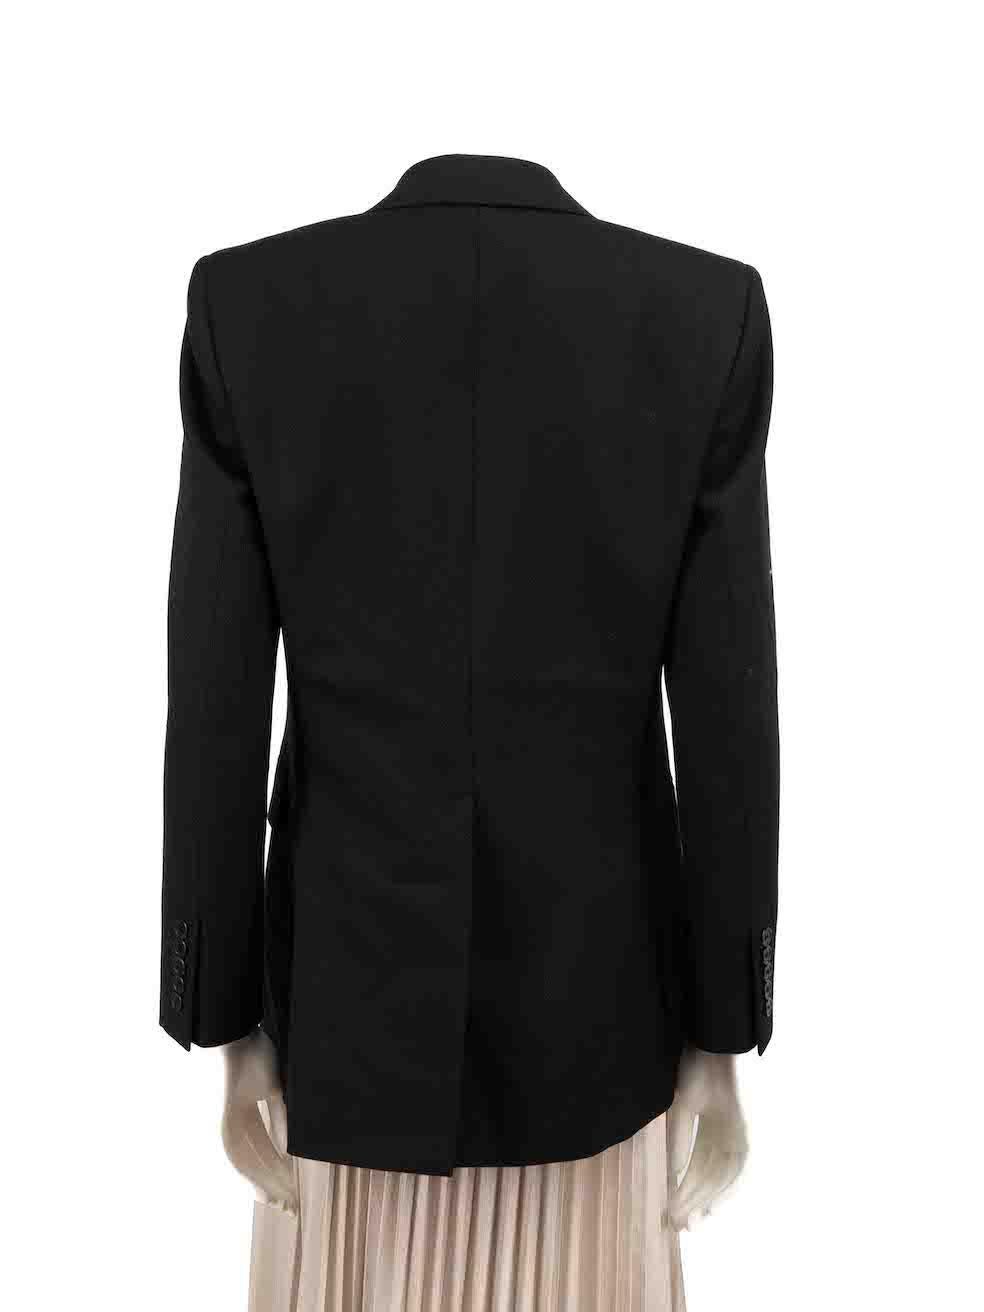 Saint Laurent Black Wool Single Breast Blazer Size XL In Good Condition For Sale In London, GB